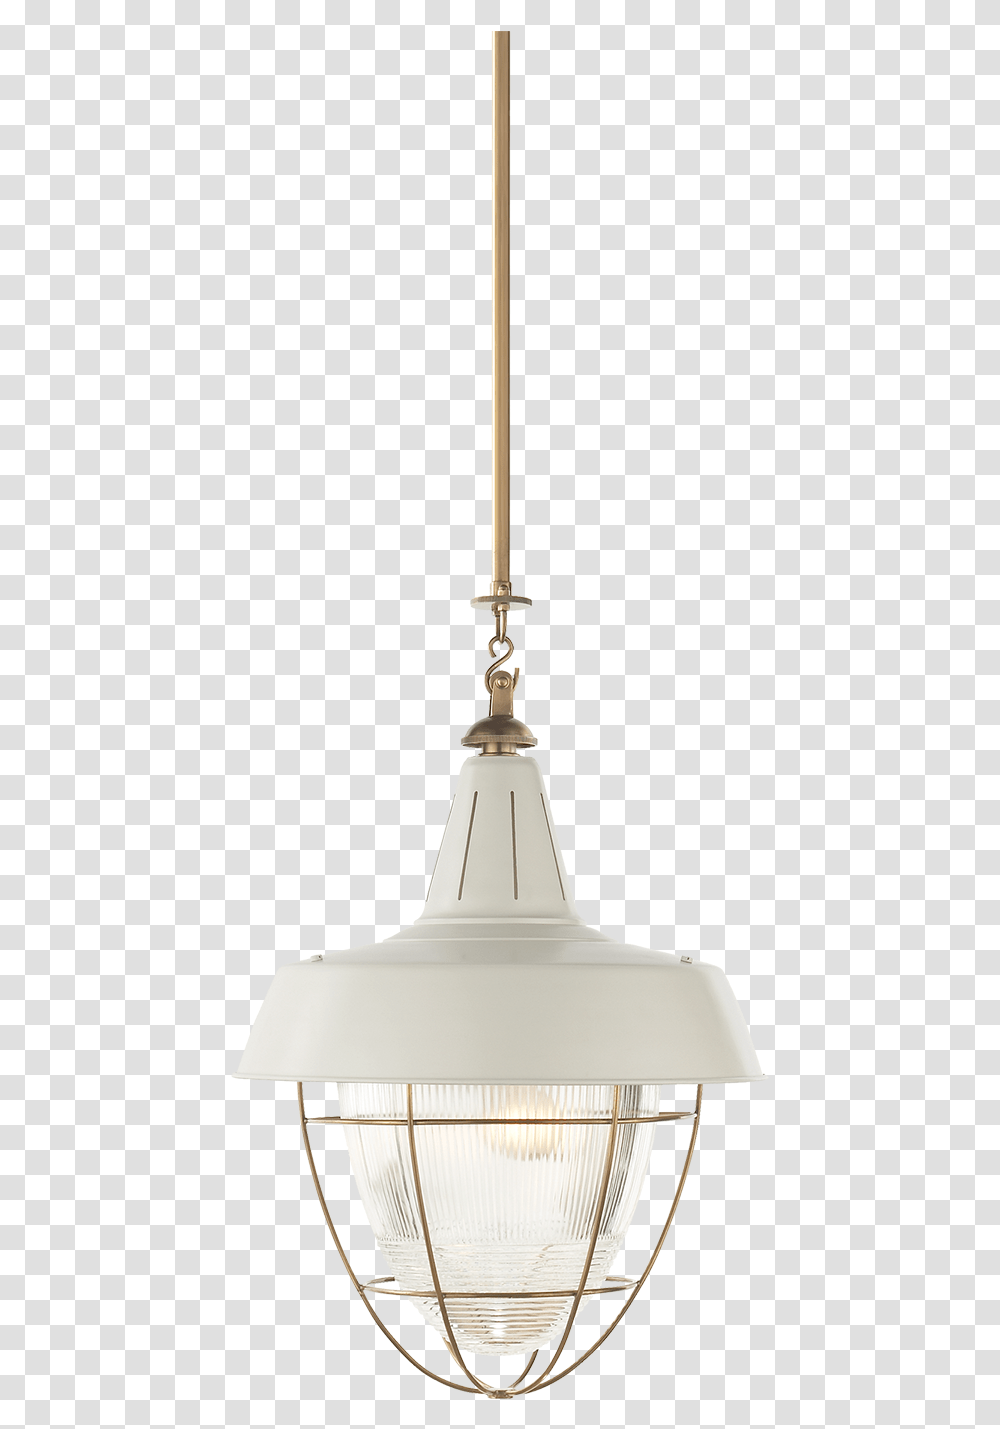 Henry Industrial Hanging Light Ceiling Fixture, Lamp, Light Fixture, Ceiling Light, Bronze Transparent Png